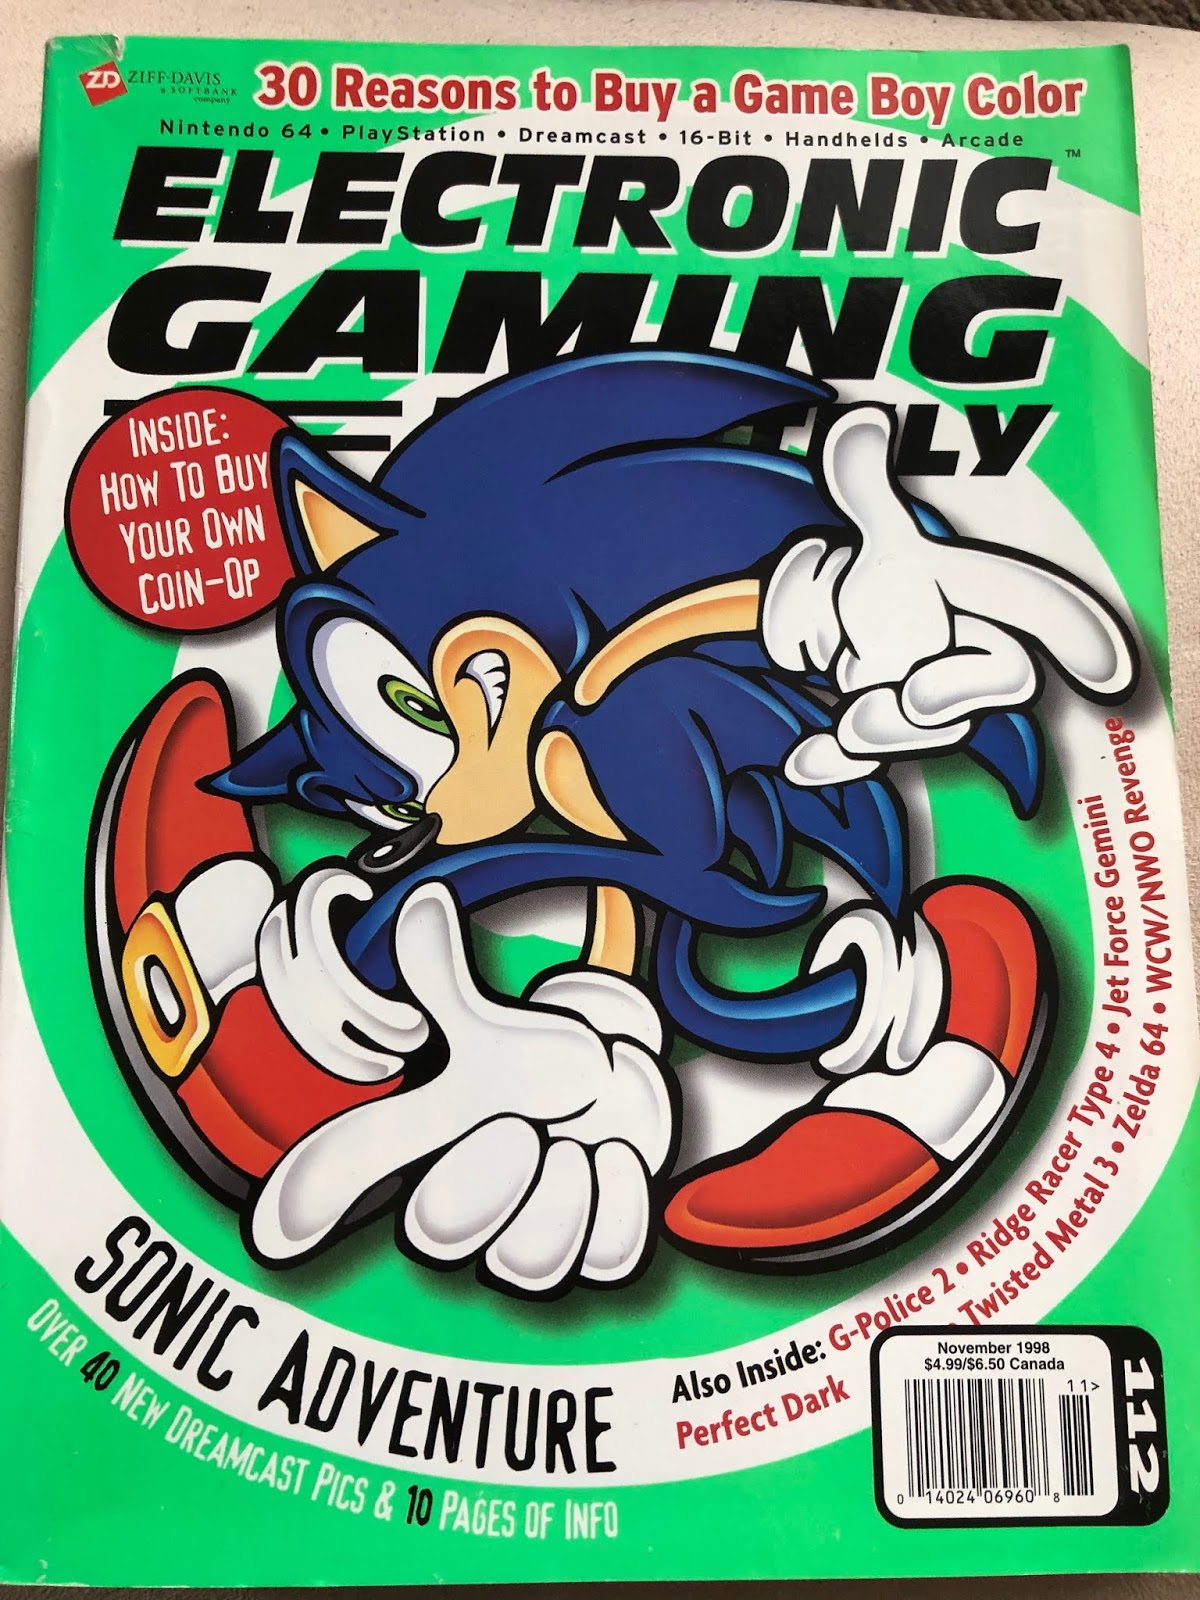 The Dreamcast Junkyard: A Quick Look At Sonic Adventure 2's Green Hill Zone